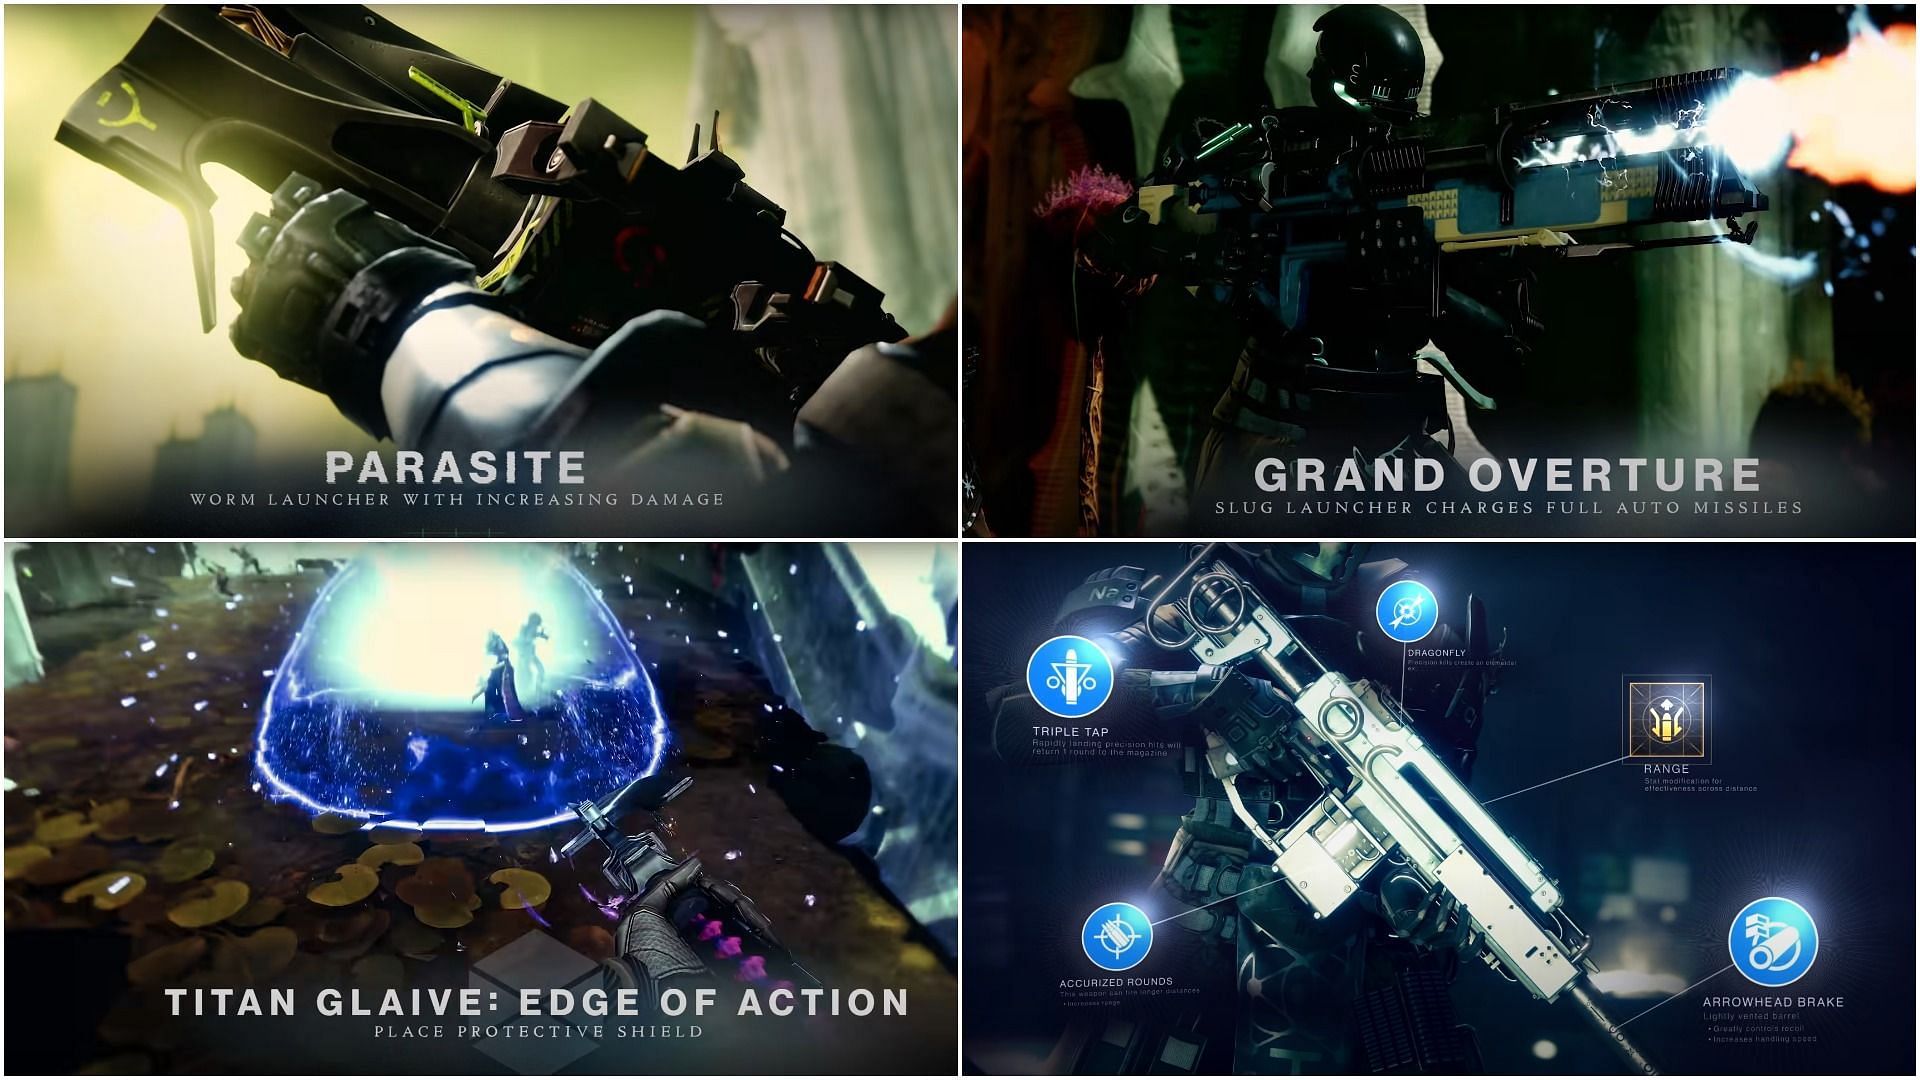 Destiny 2: The Witch Queen weapons and gears (Image via Bungie)